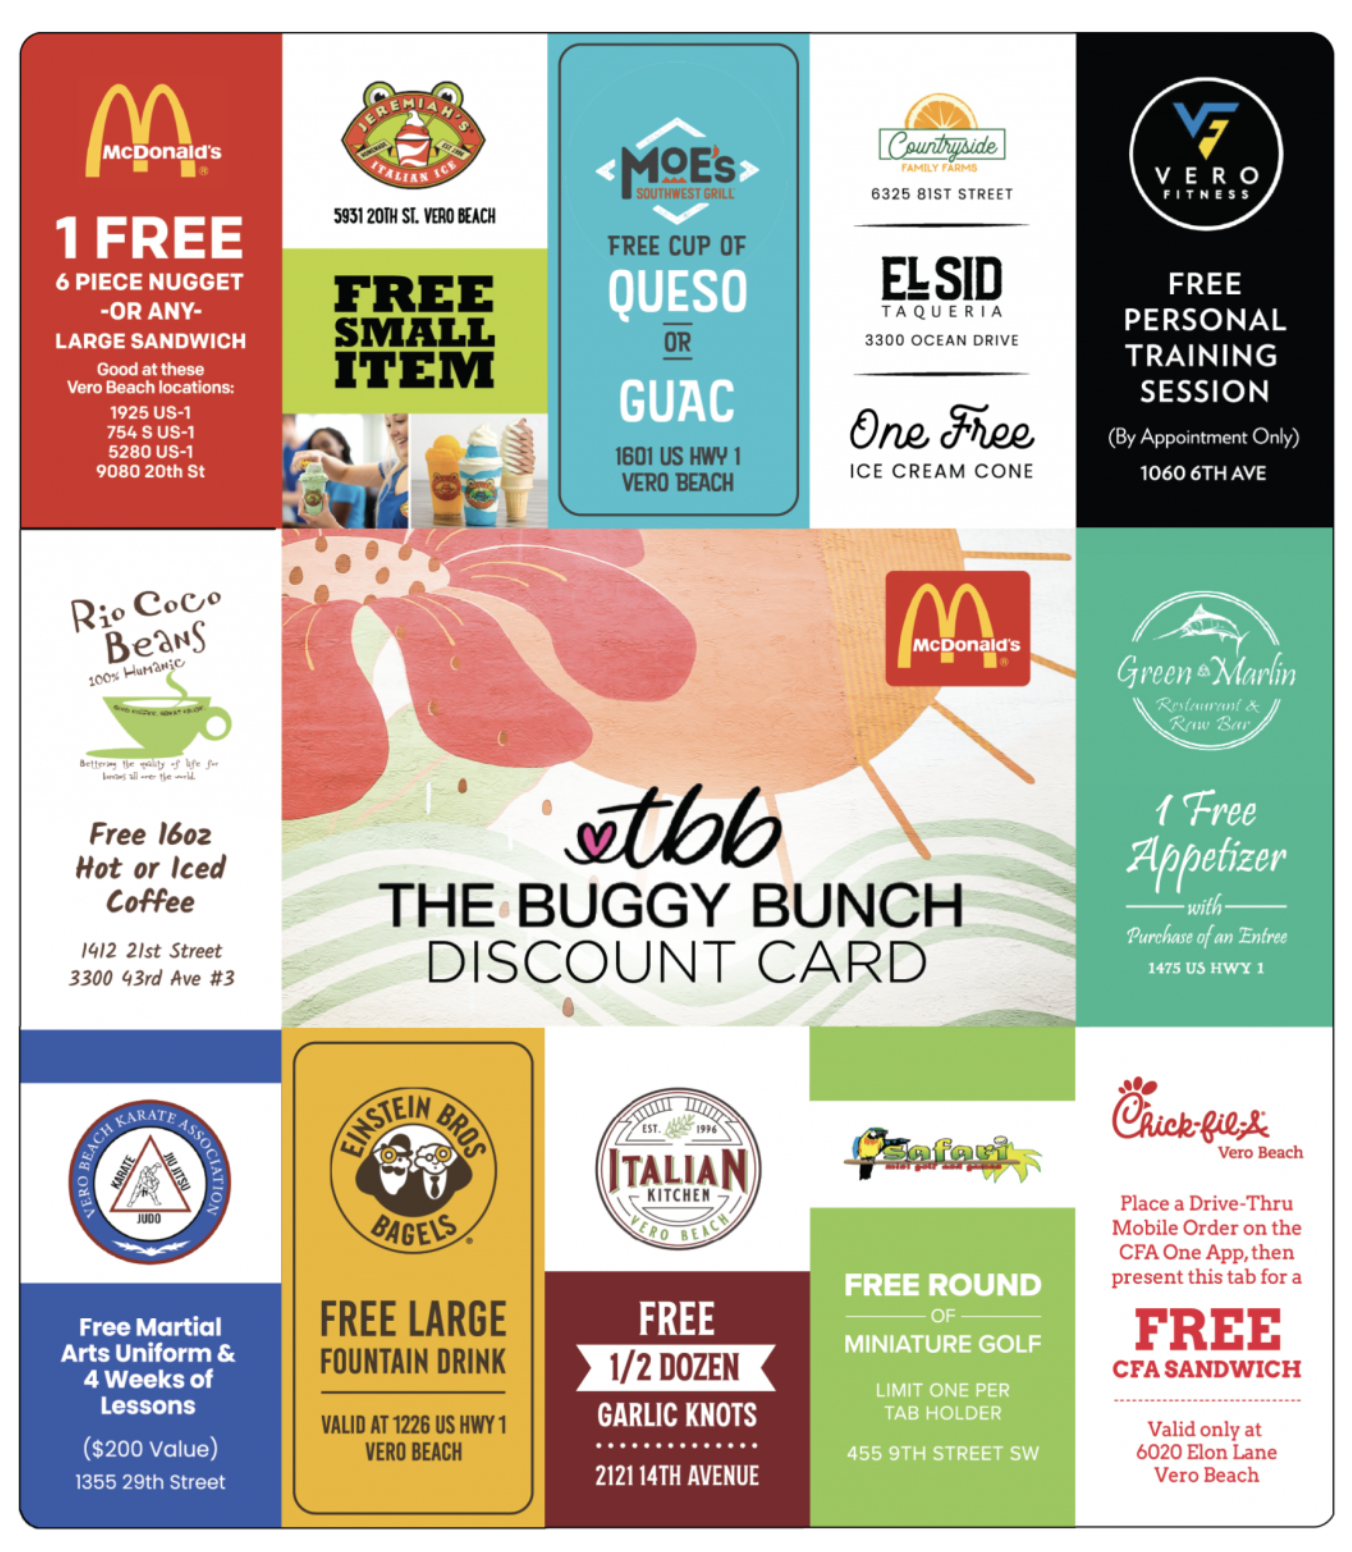 The Buggy Bunch Discount Card